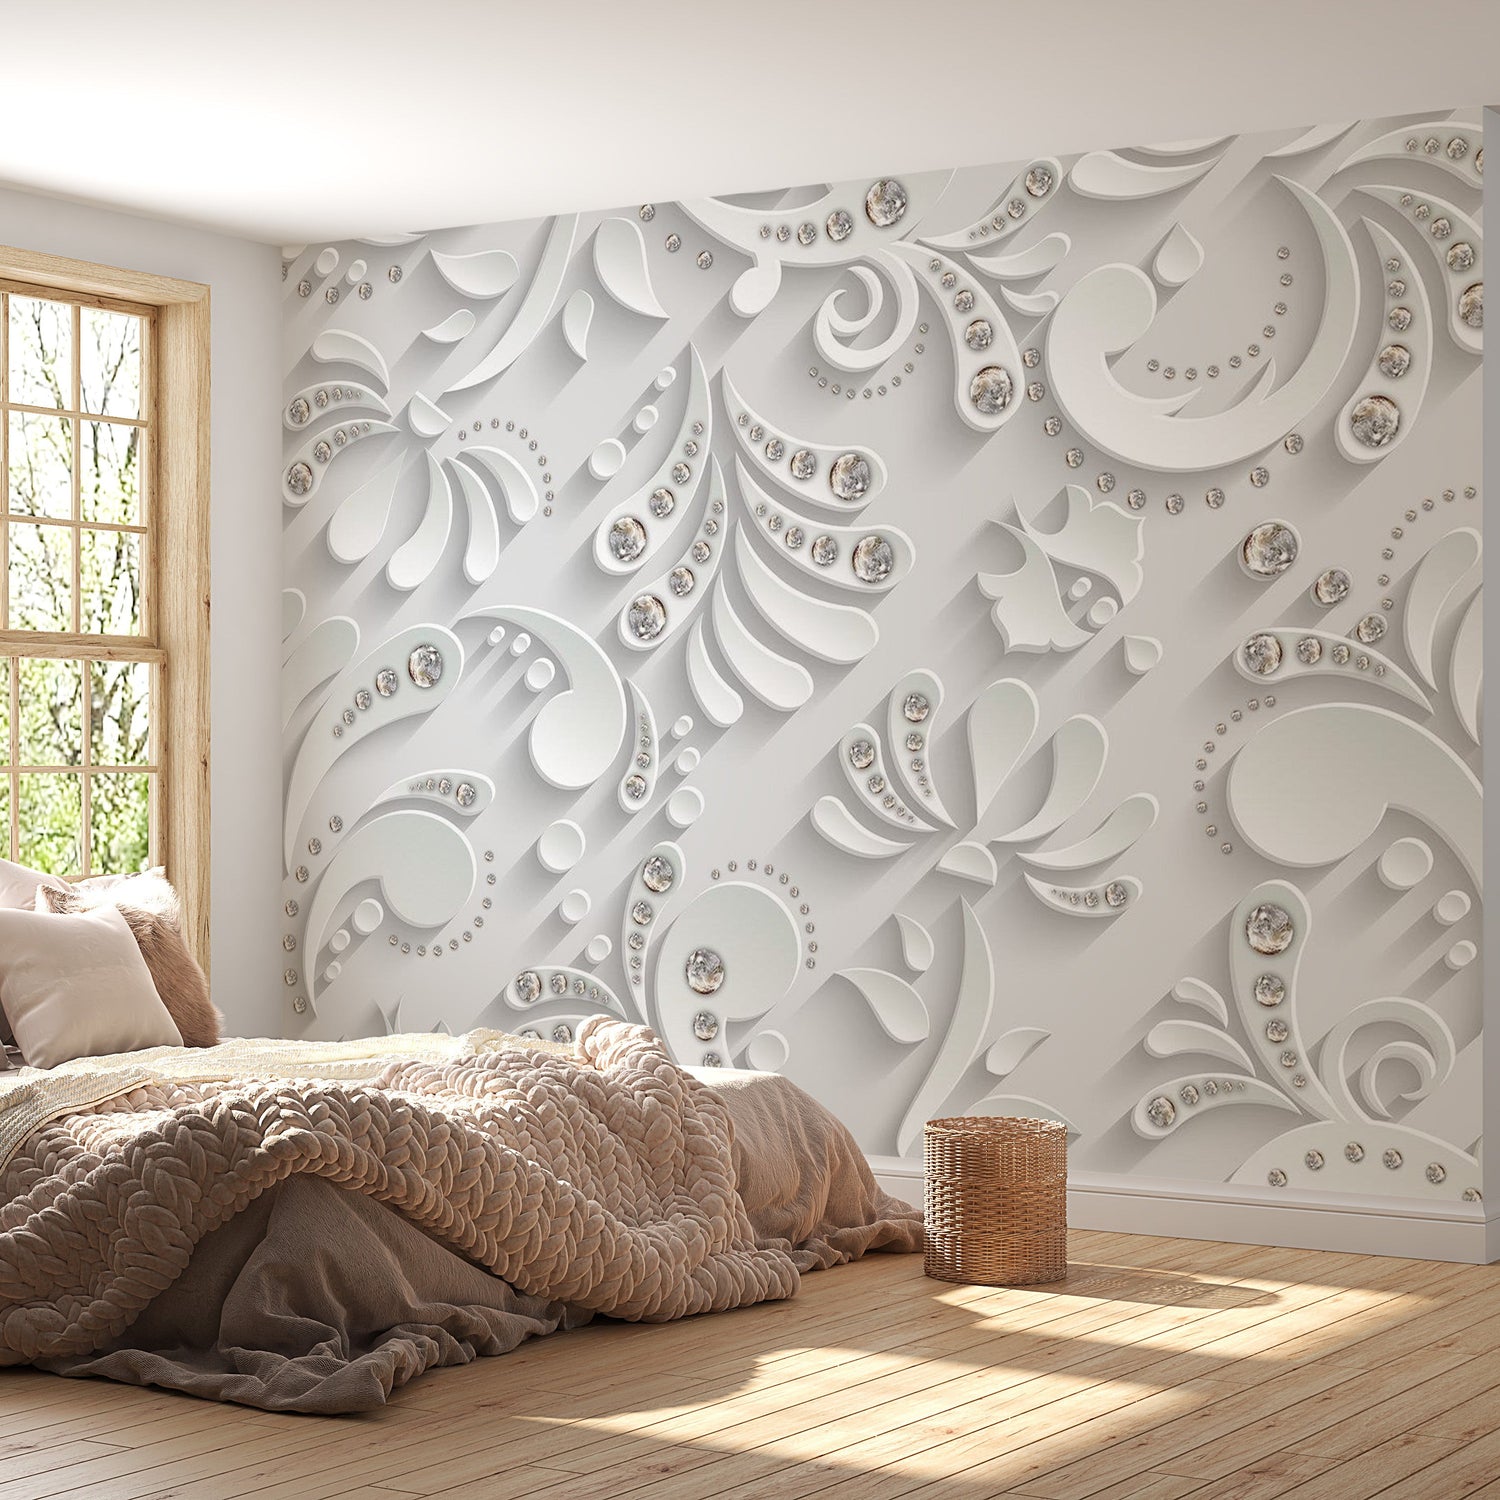 Peel & Stick Glam Wall Mural - Flowers With Crystals - Removable Wall Decals